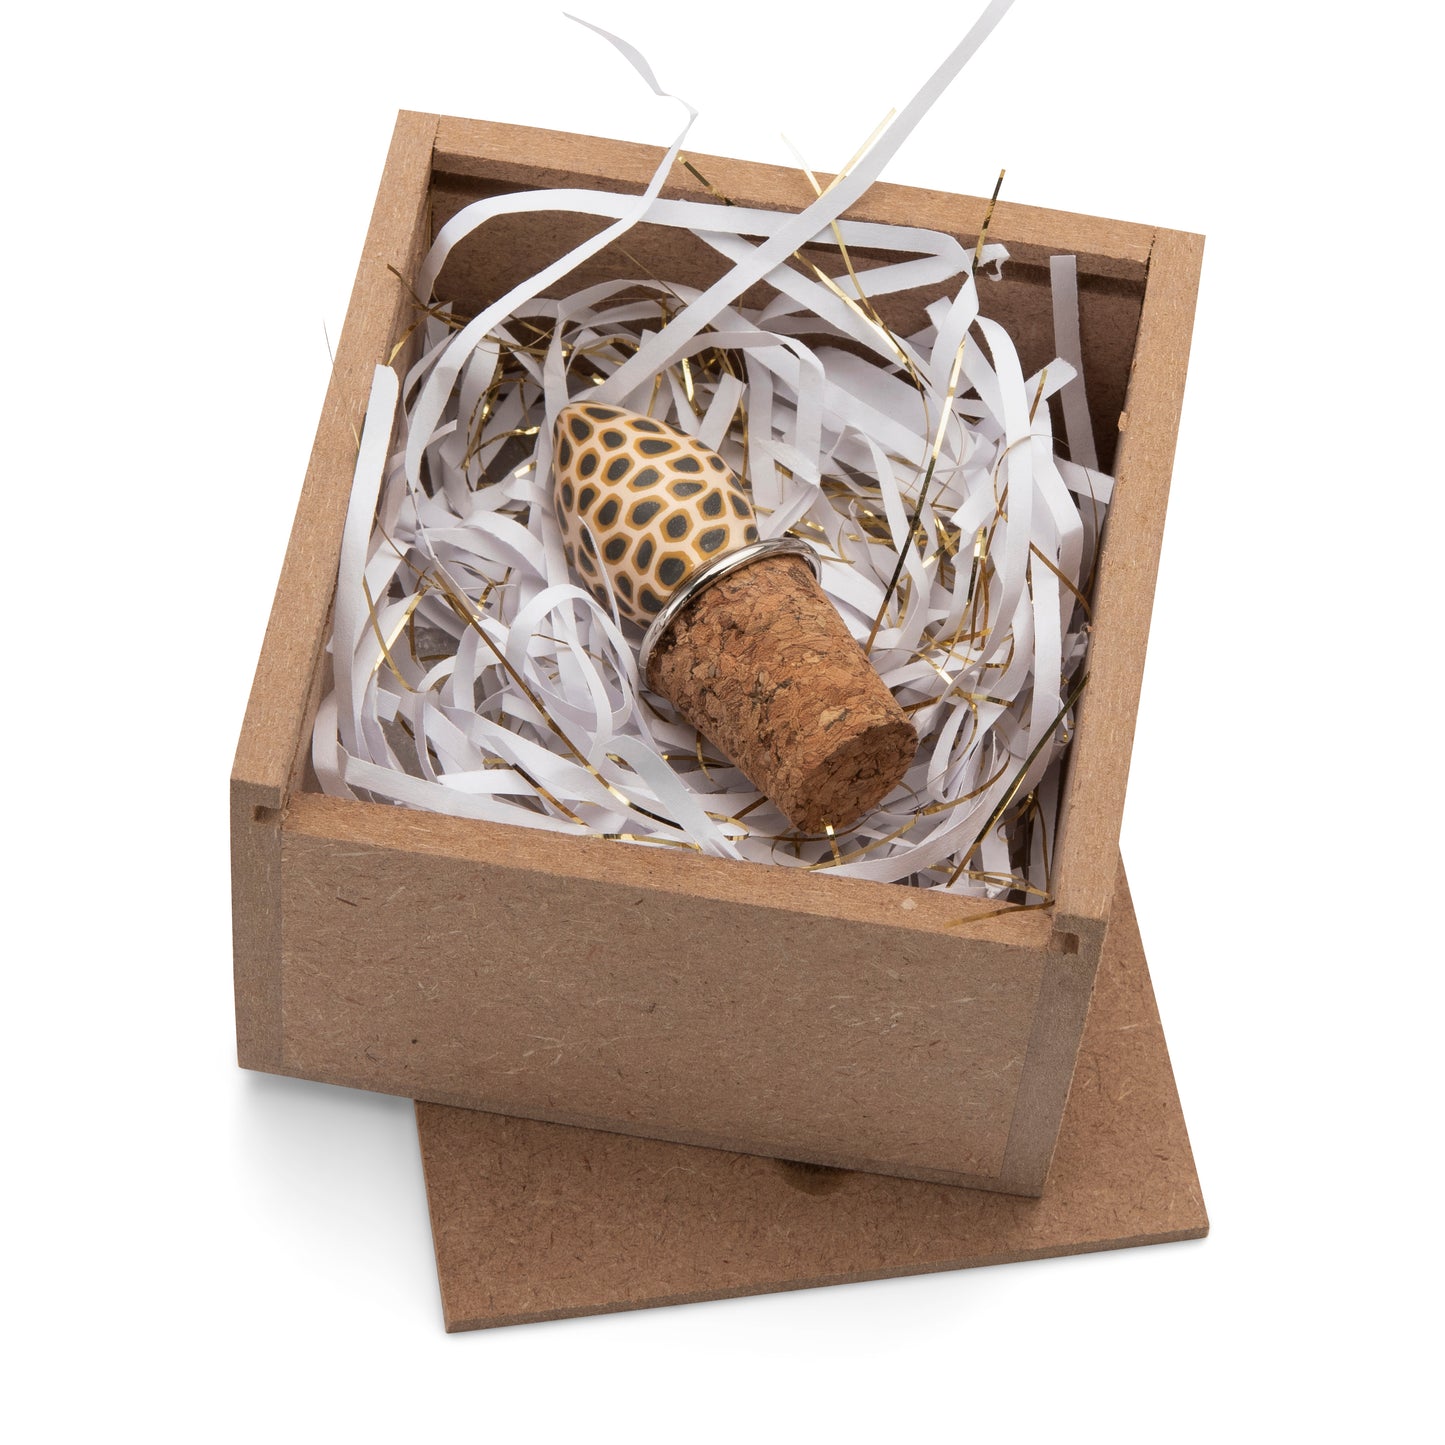 Fimo clay and silver-plated cork wine-stopper set in a wooden gift-box